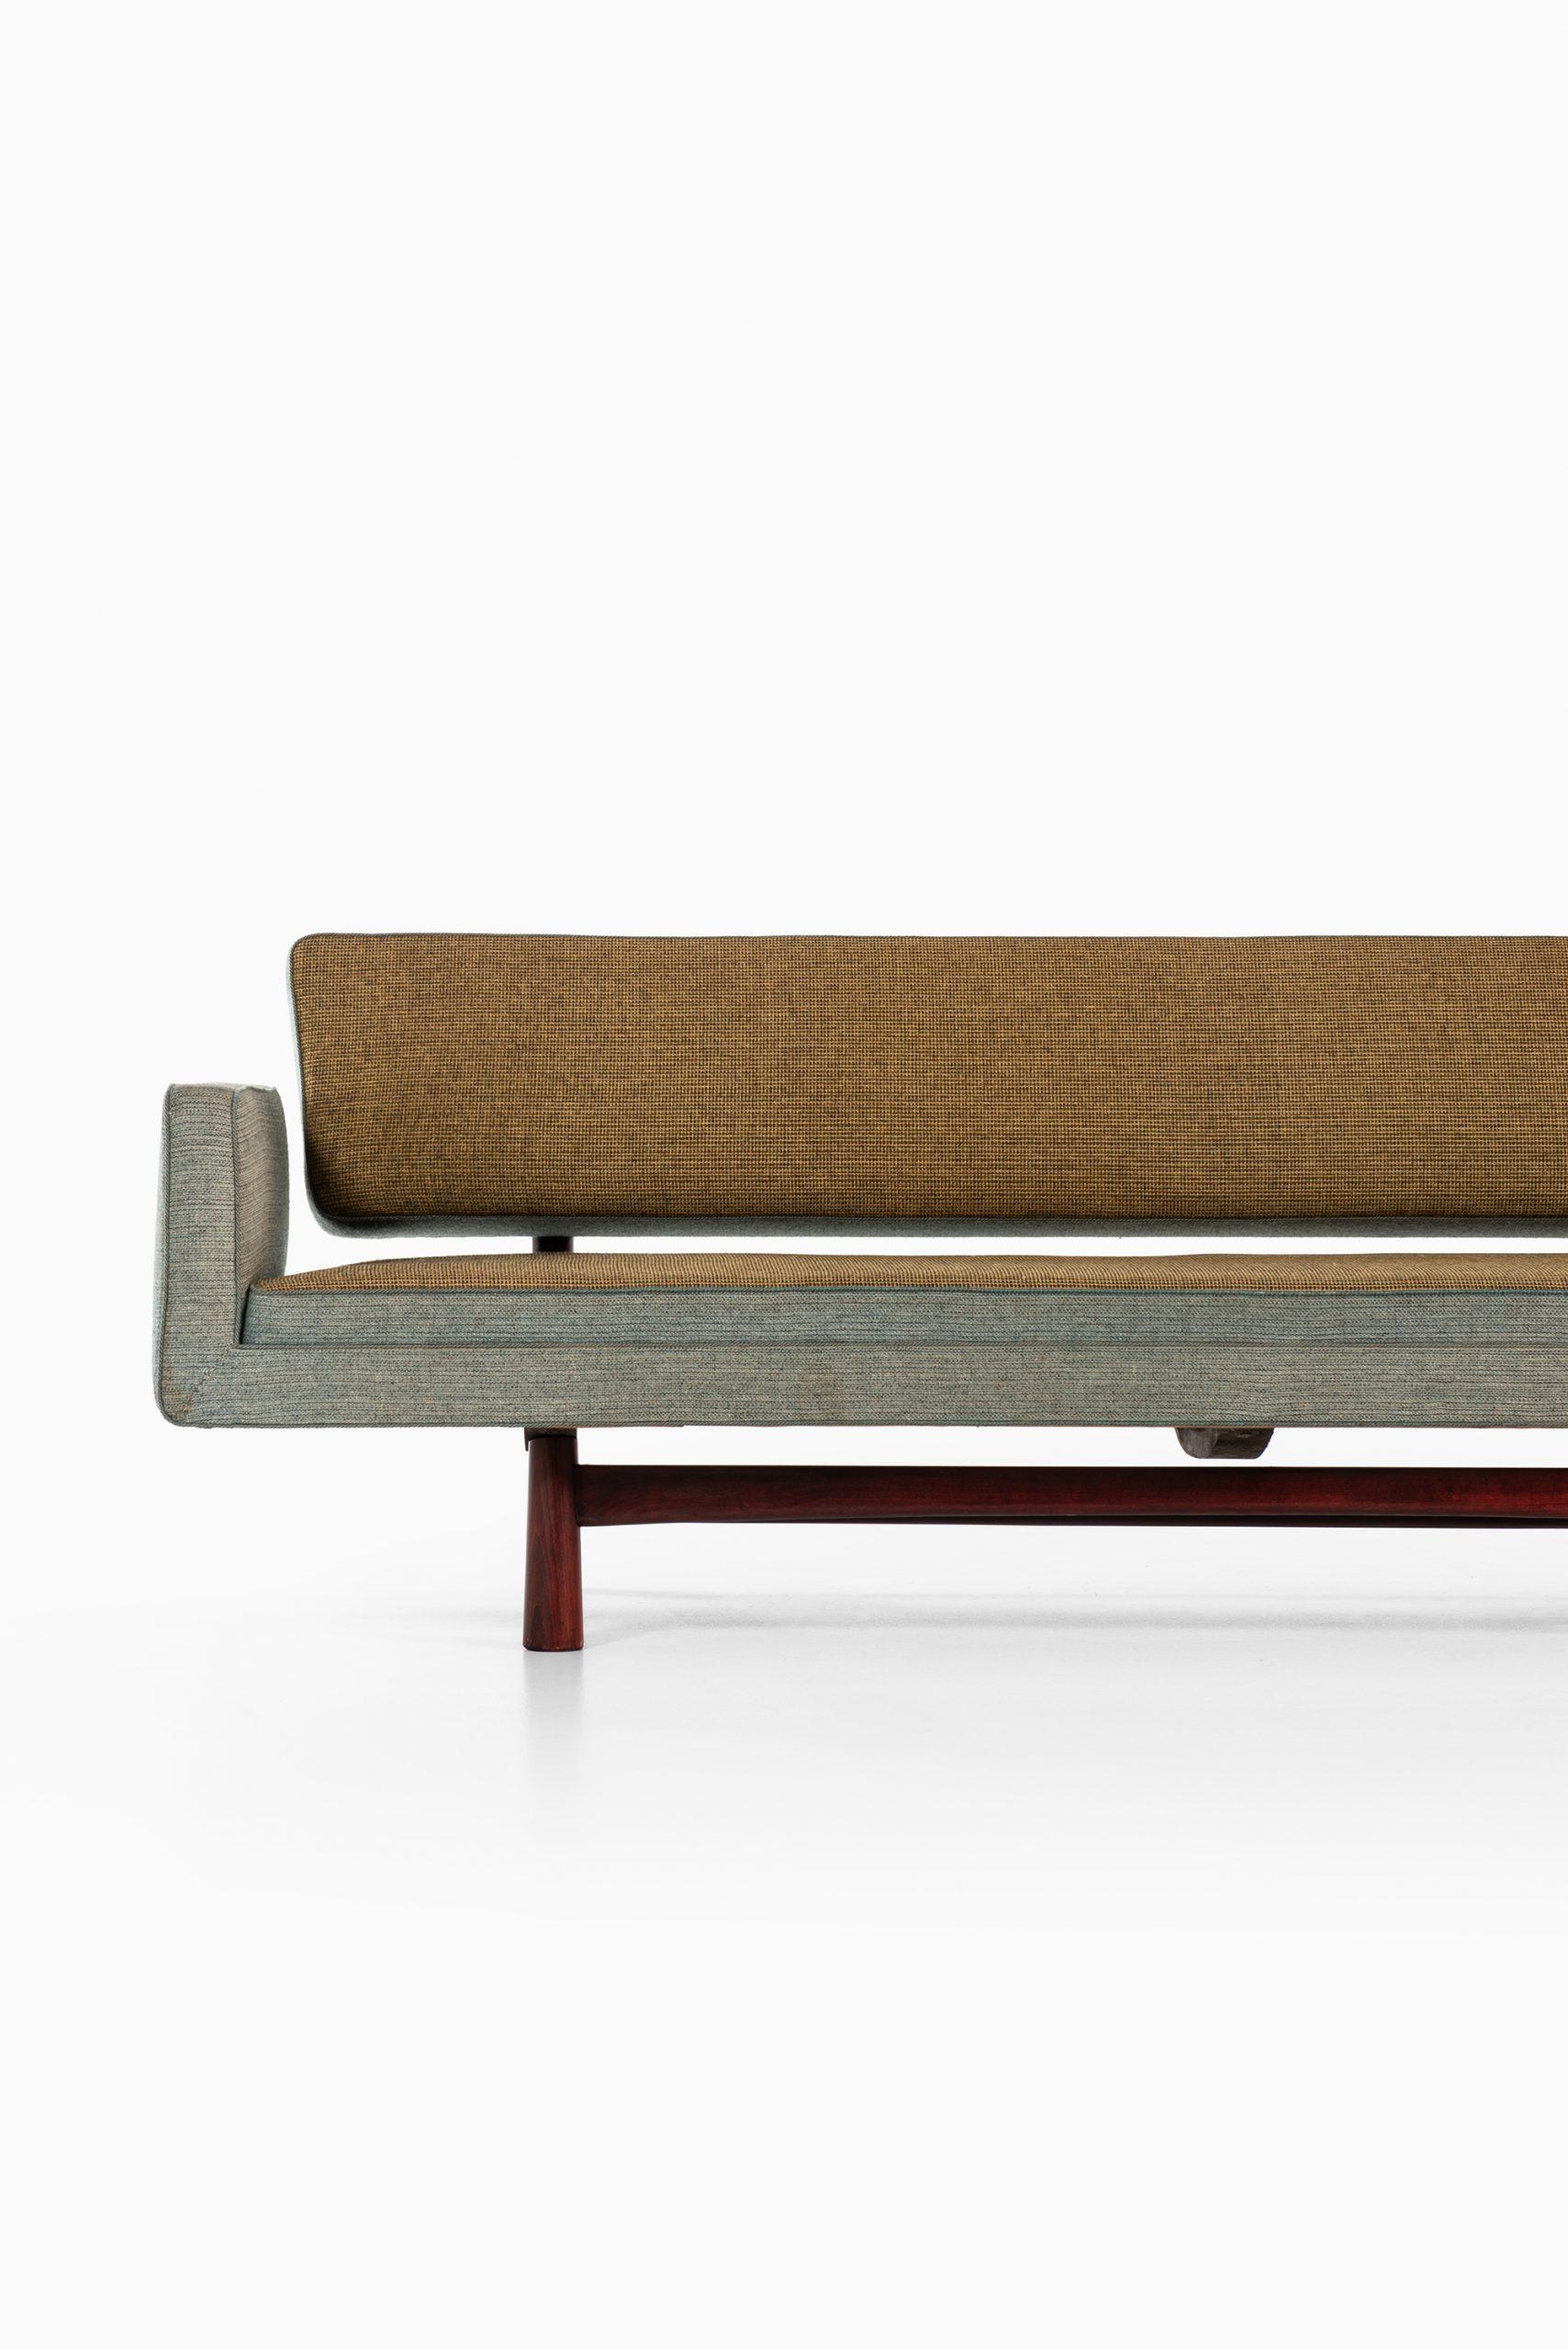 Very rare sofa model New York / 5316 designed by Edward Wormley. Produced by DUX in Sweden.
We have a pair available.